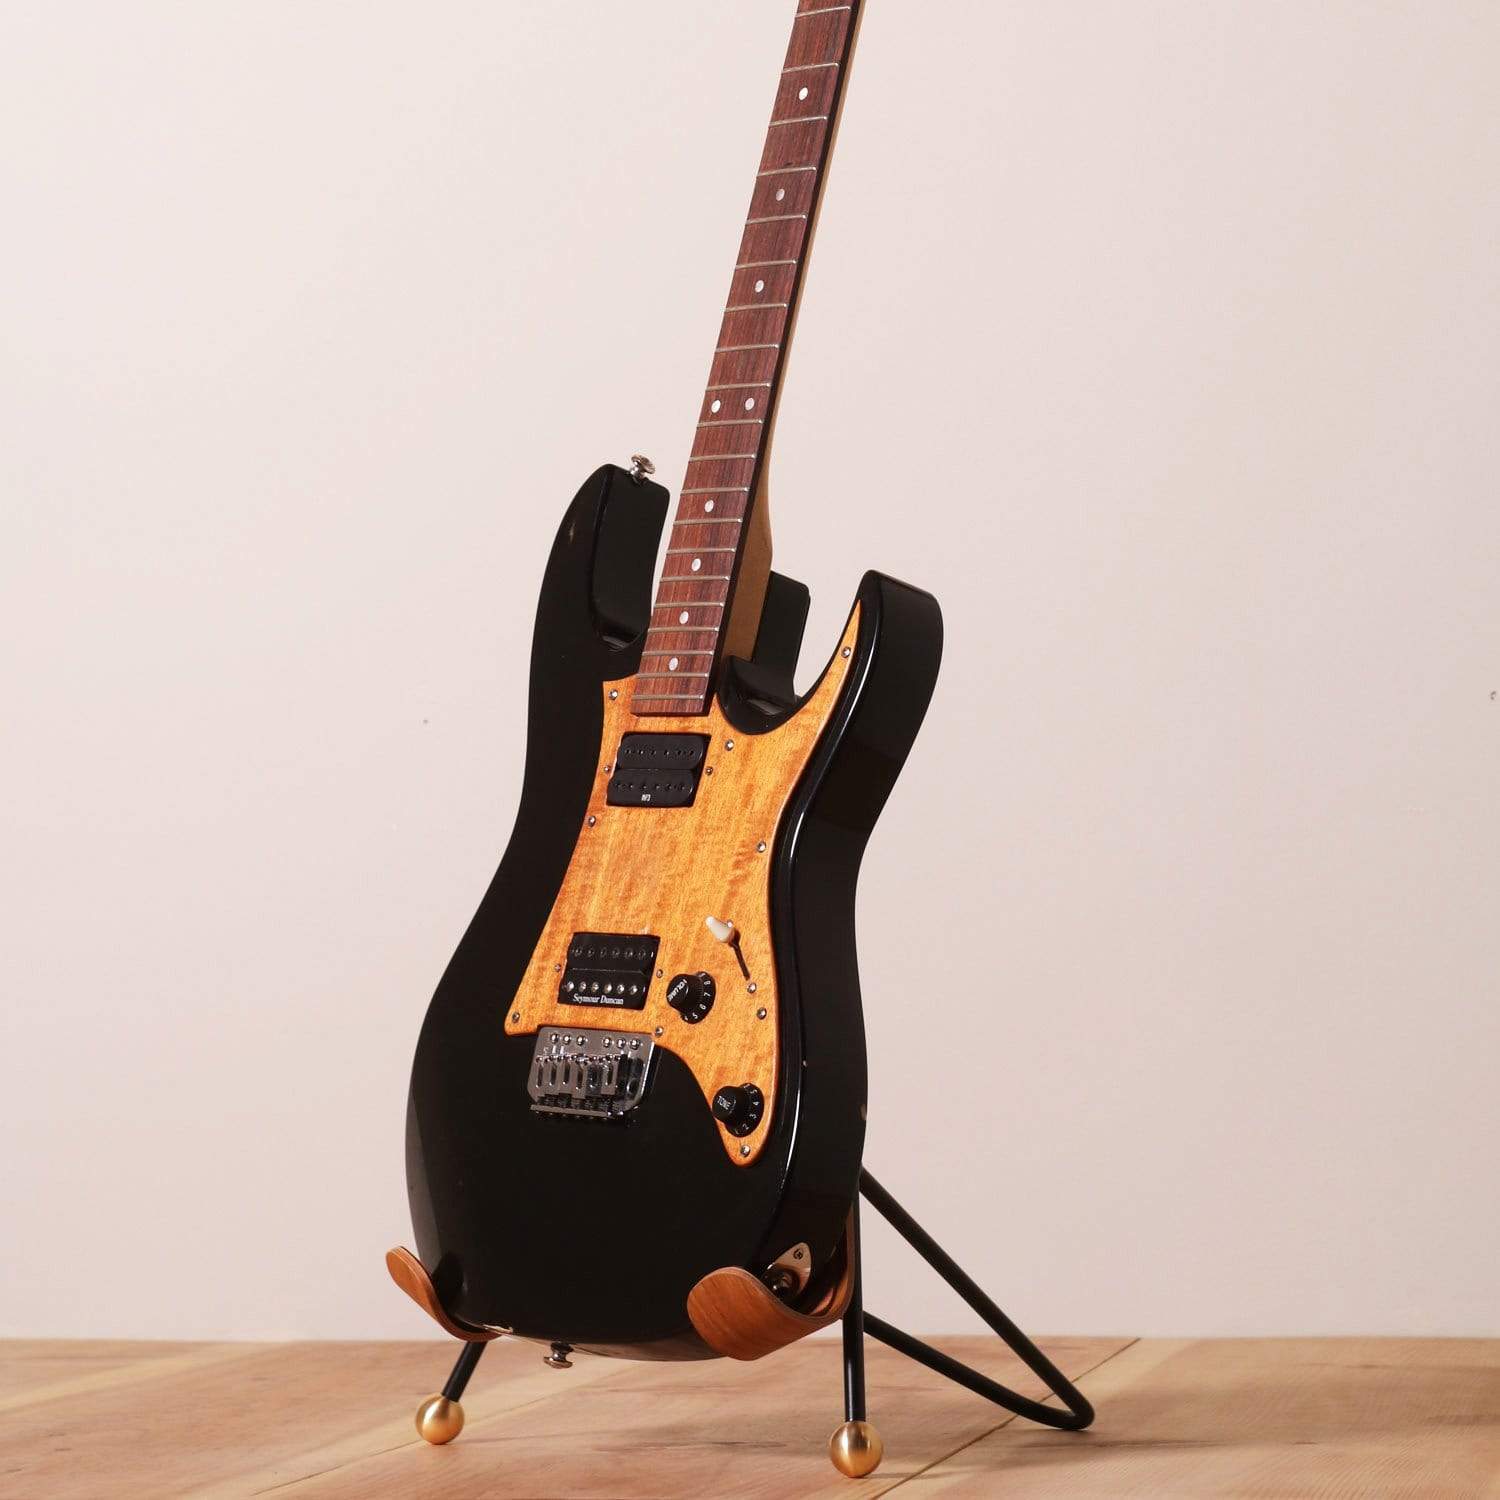 THE ENCORE guitar display stand